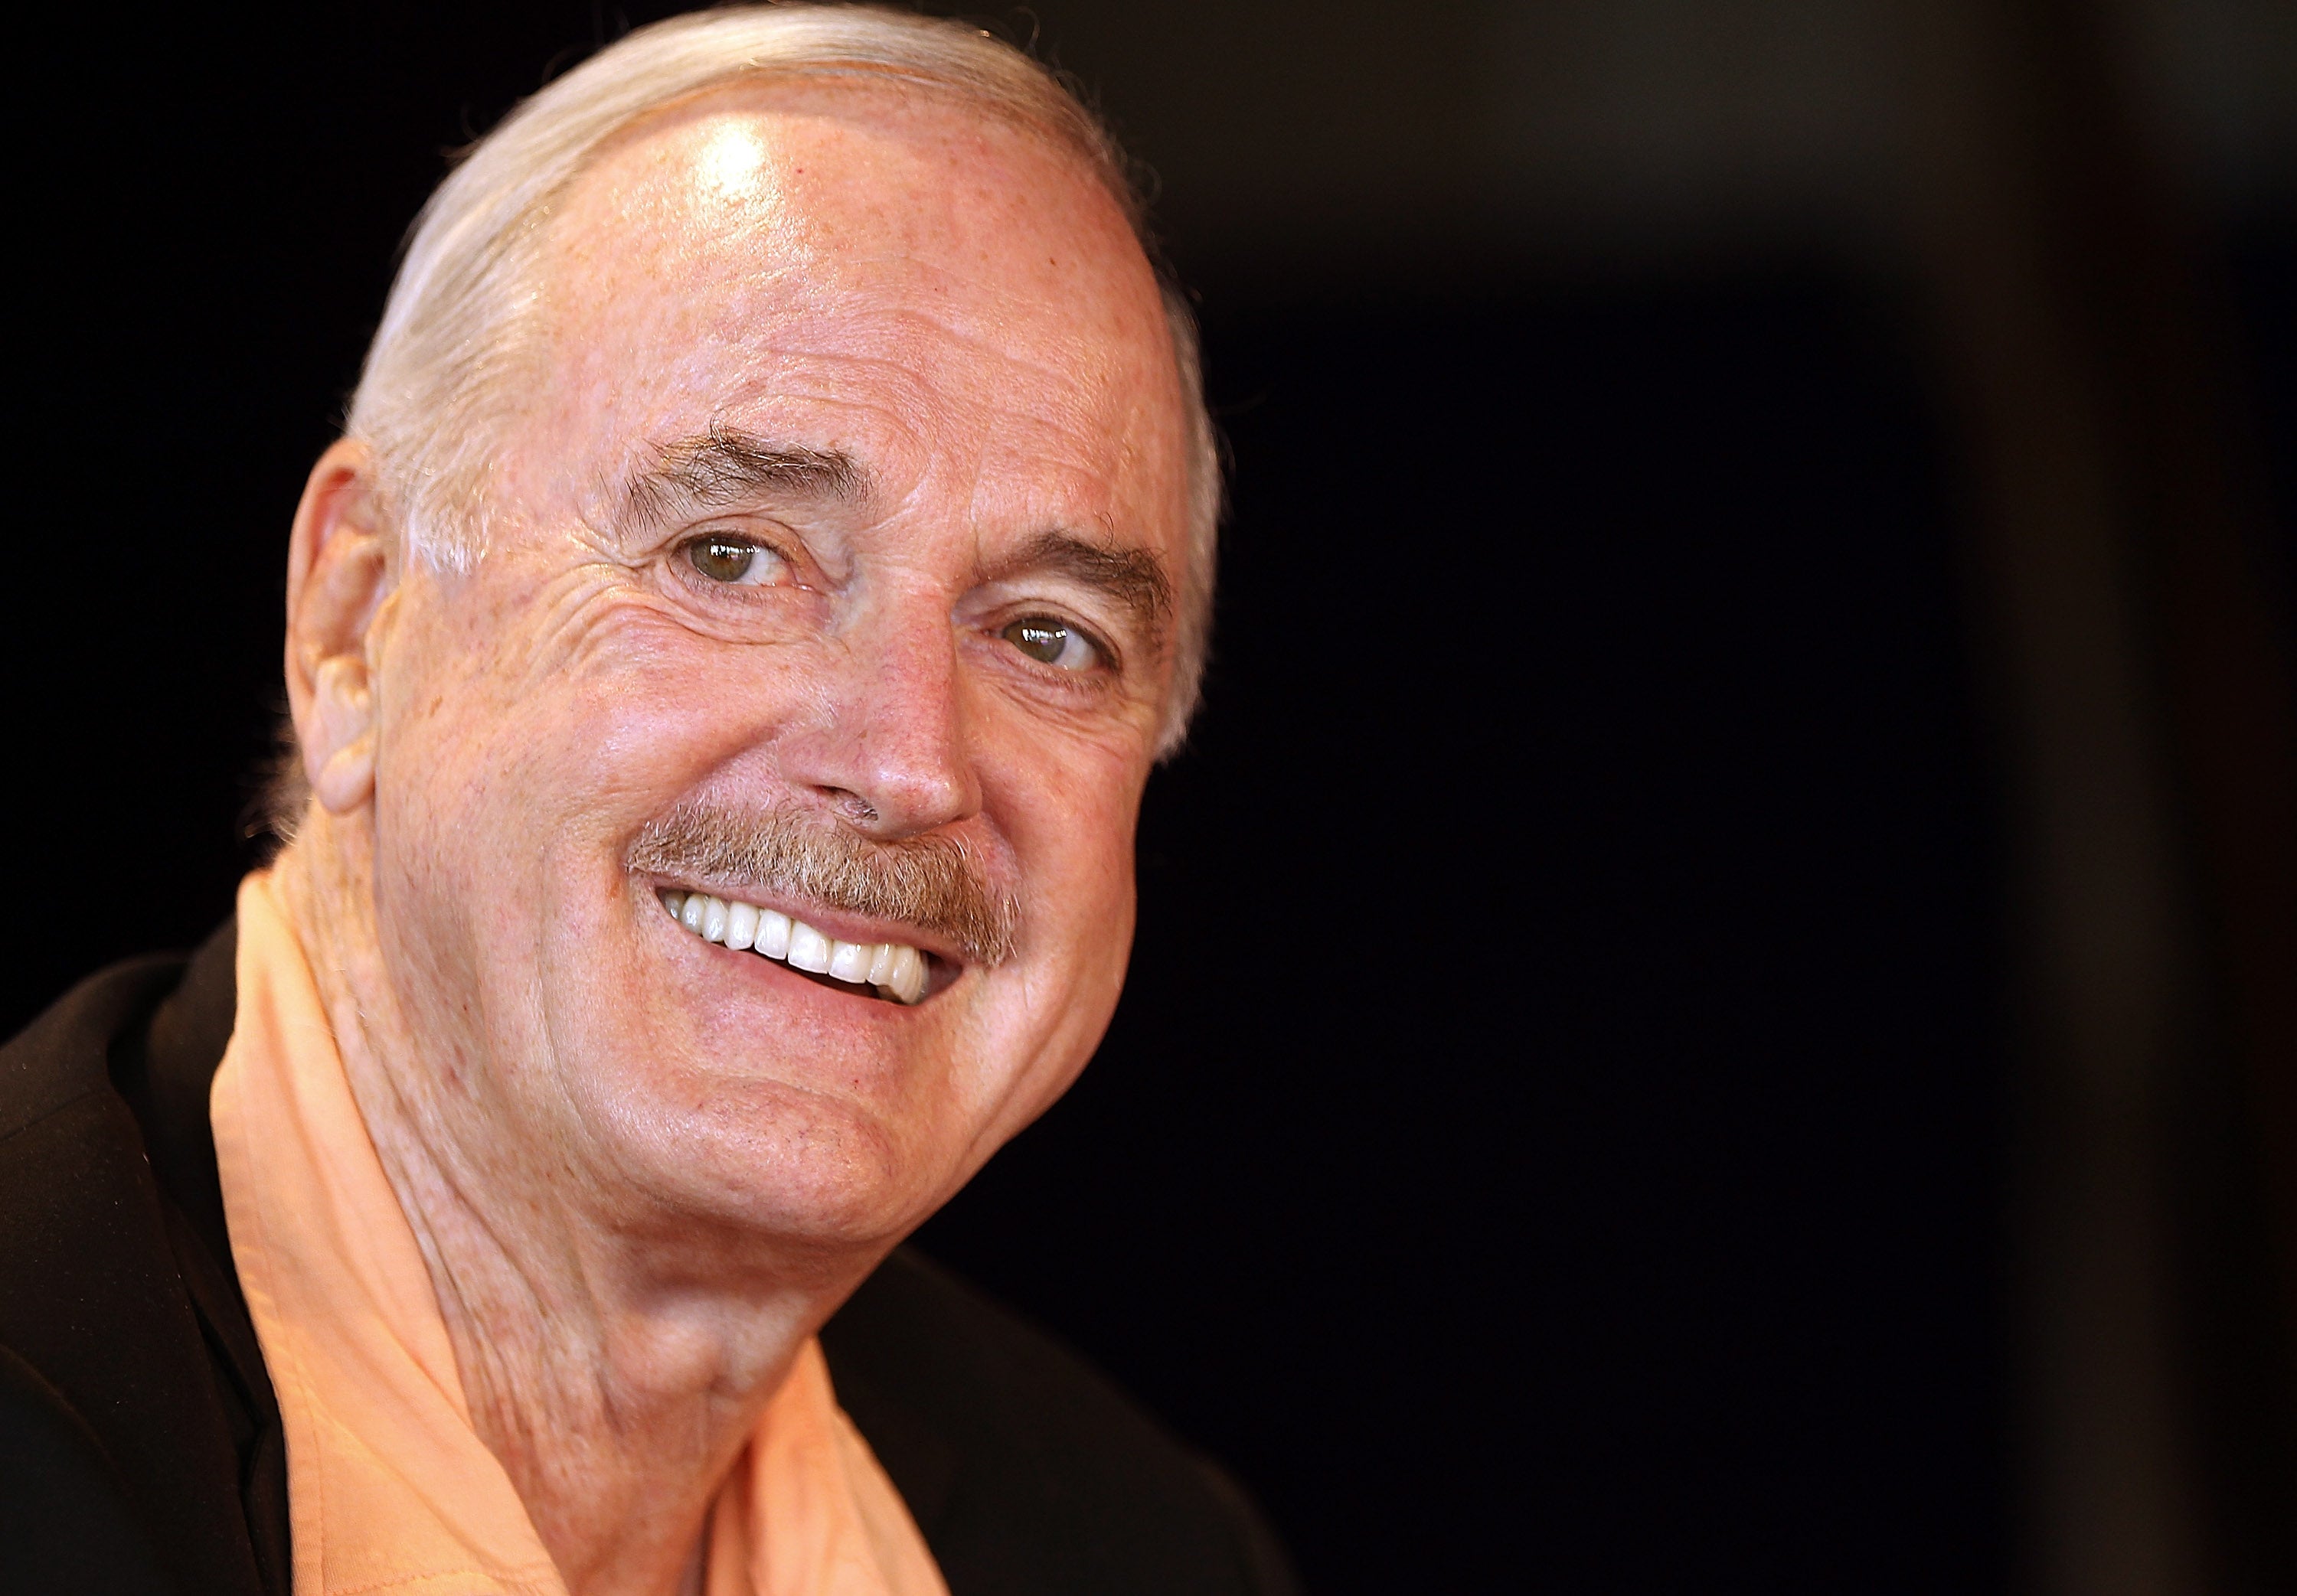 John Cleese has criticised the way the BBC commissions comedy